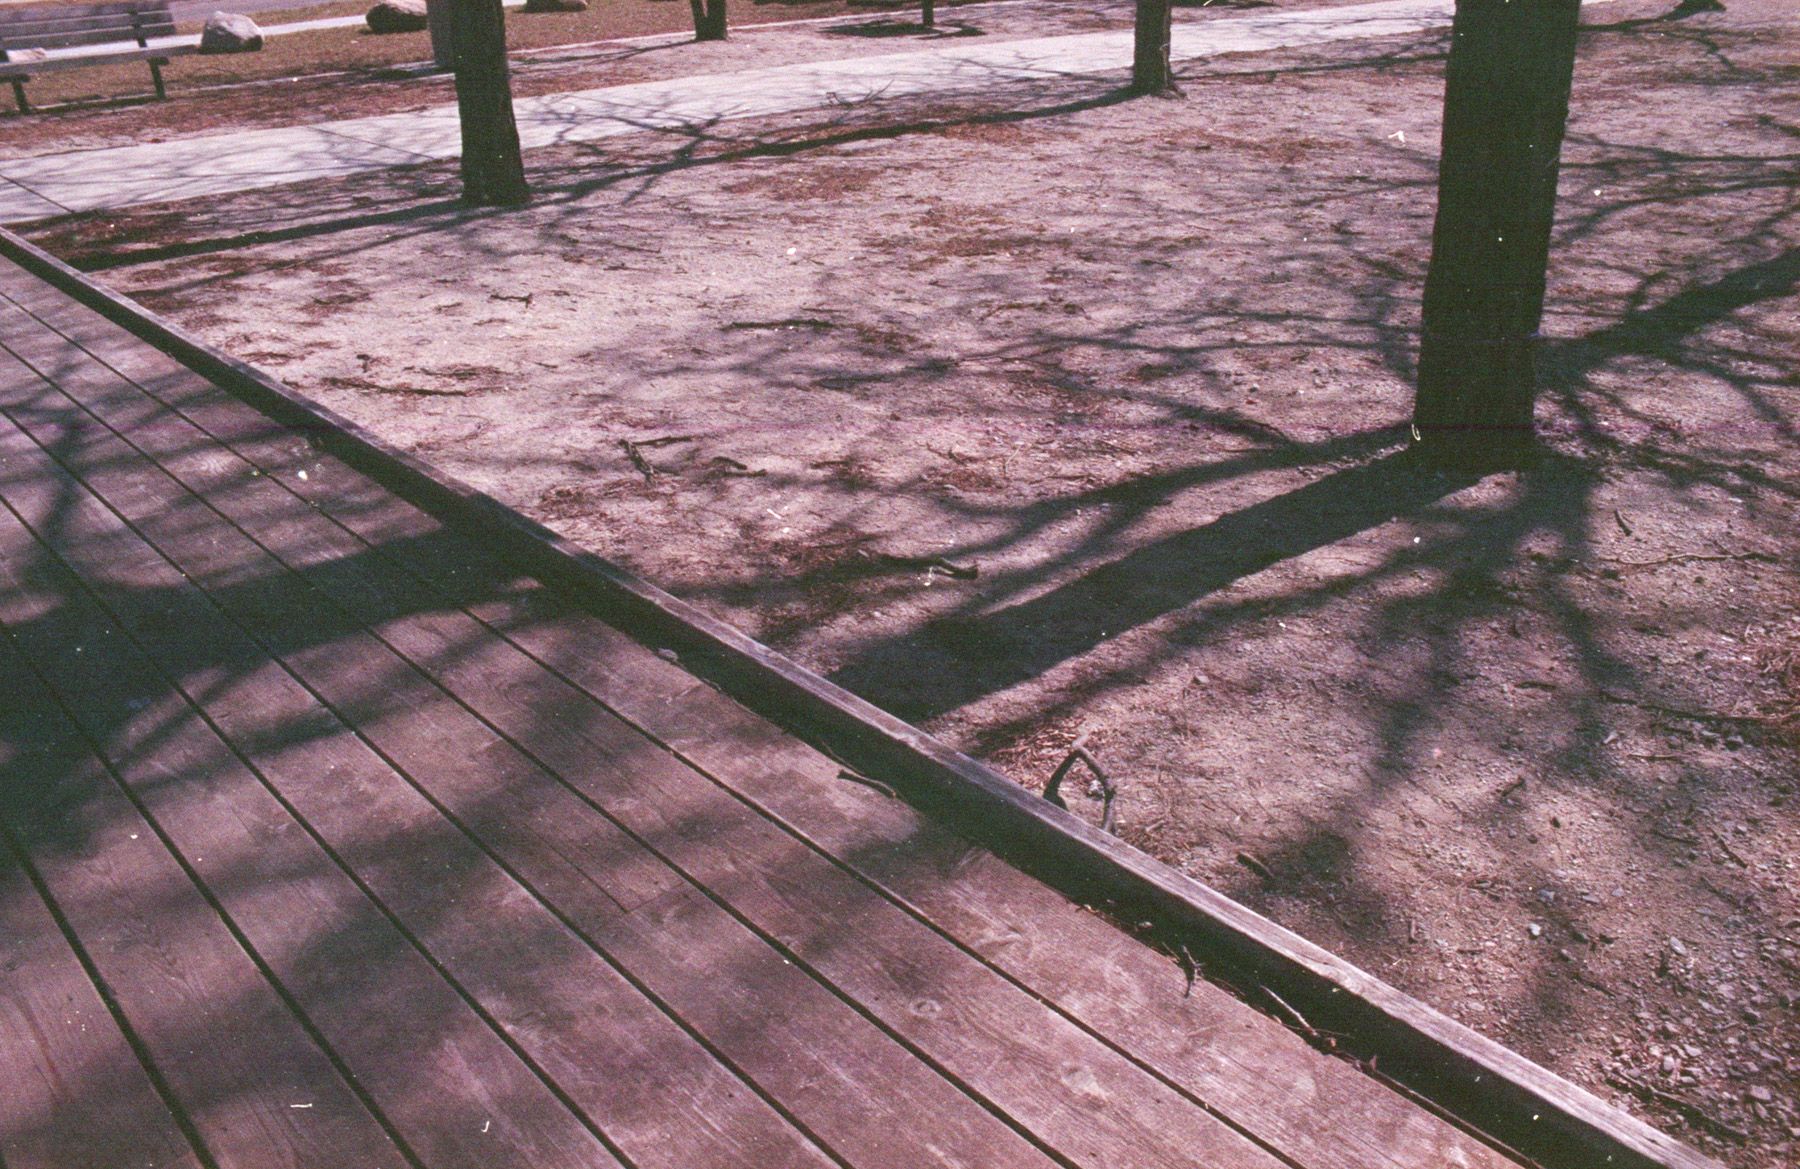 Tree trunks, only the shadows of branches, cutting across a boardwalk.